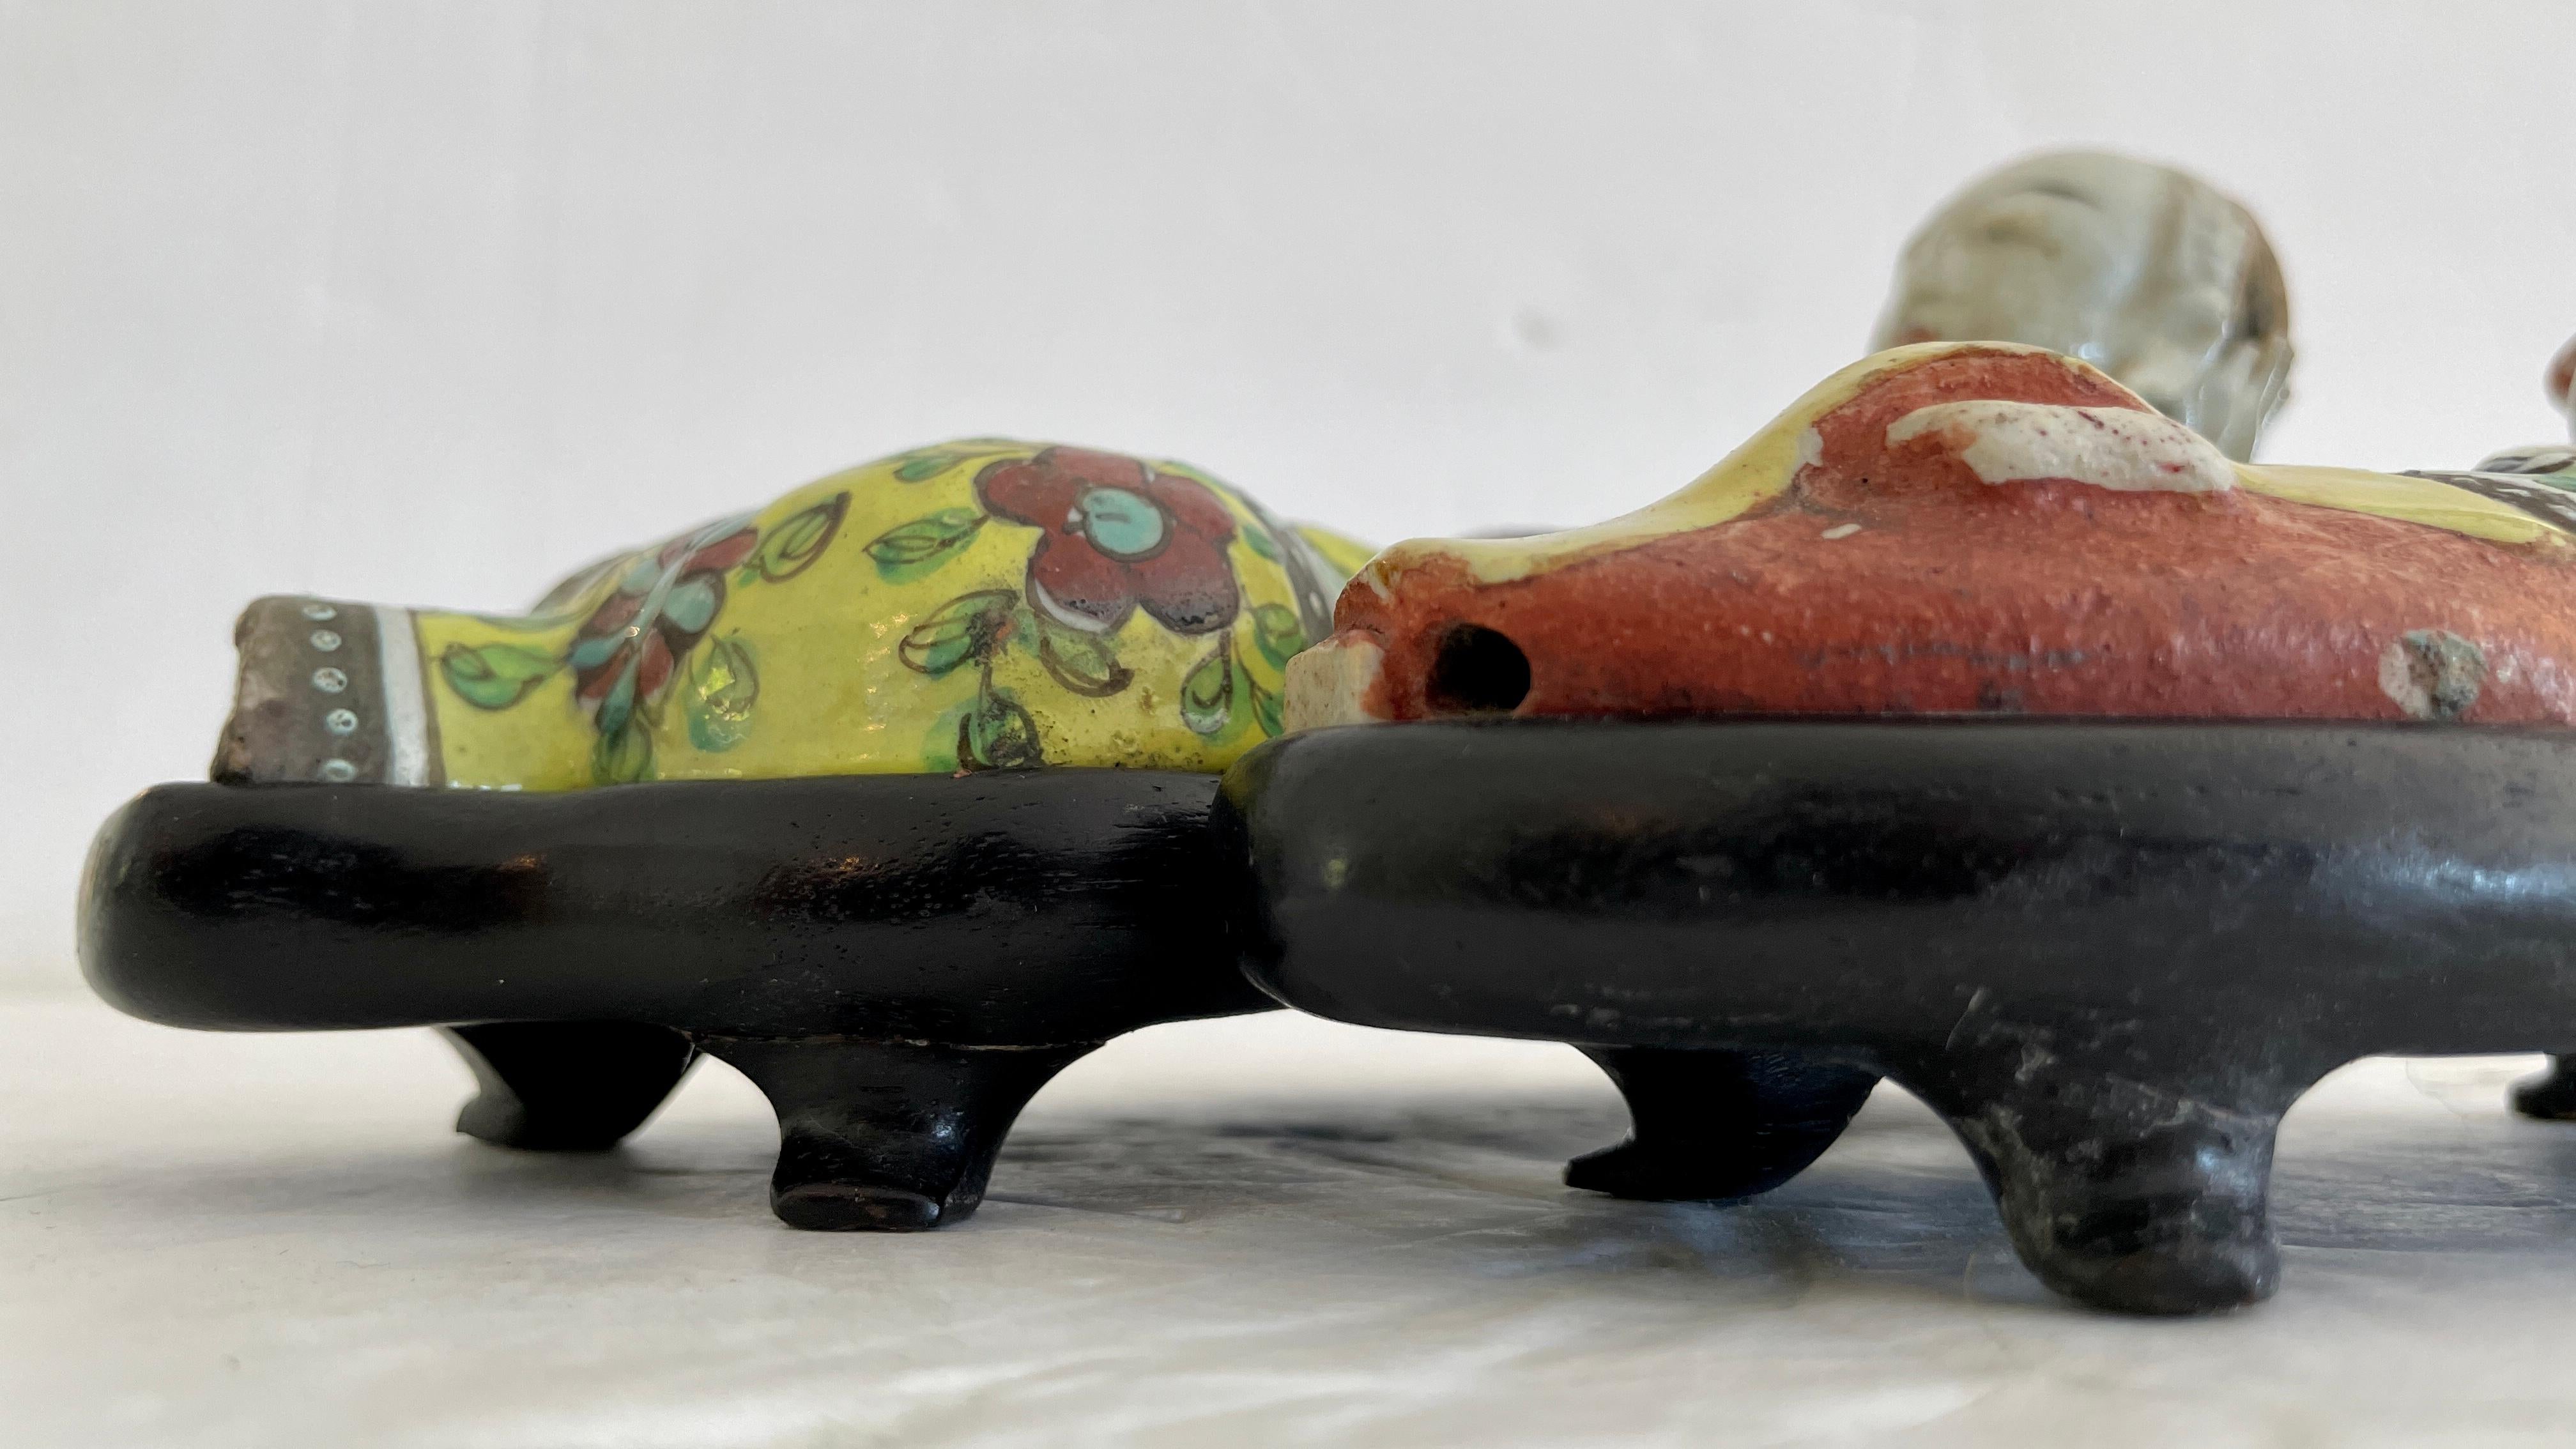 Pair of antique Asian male and female figurines laying on their beds. Nice ceramic with beautiful colors. Add them to your Asian inspired interiors and table tops.